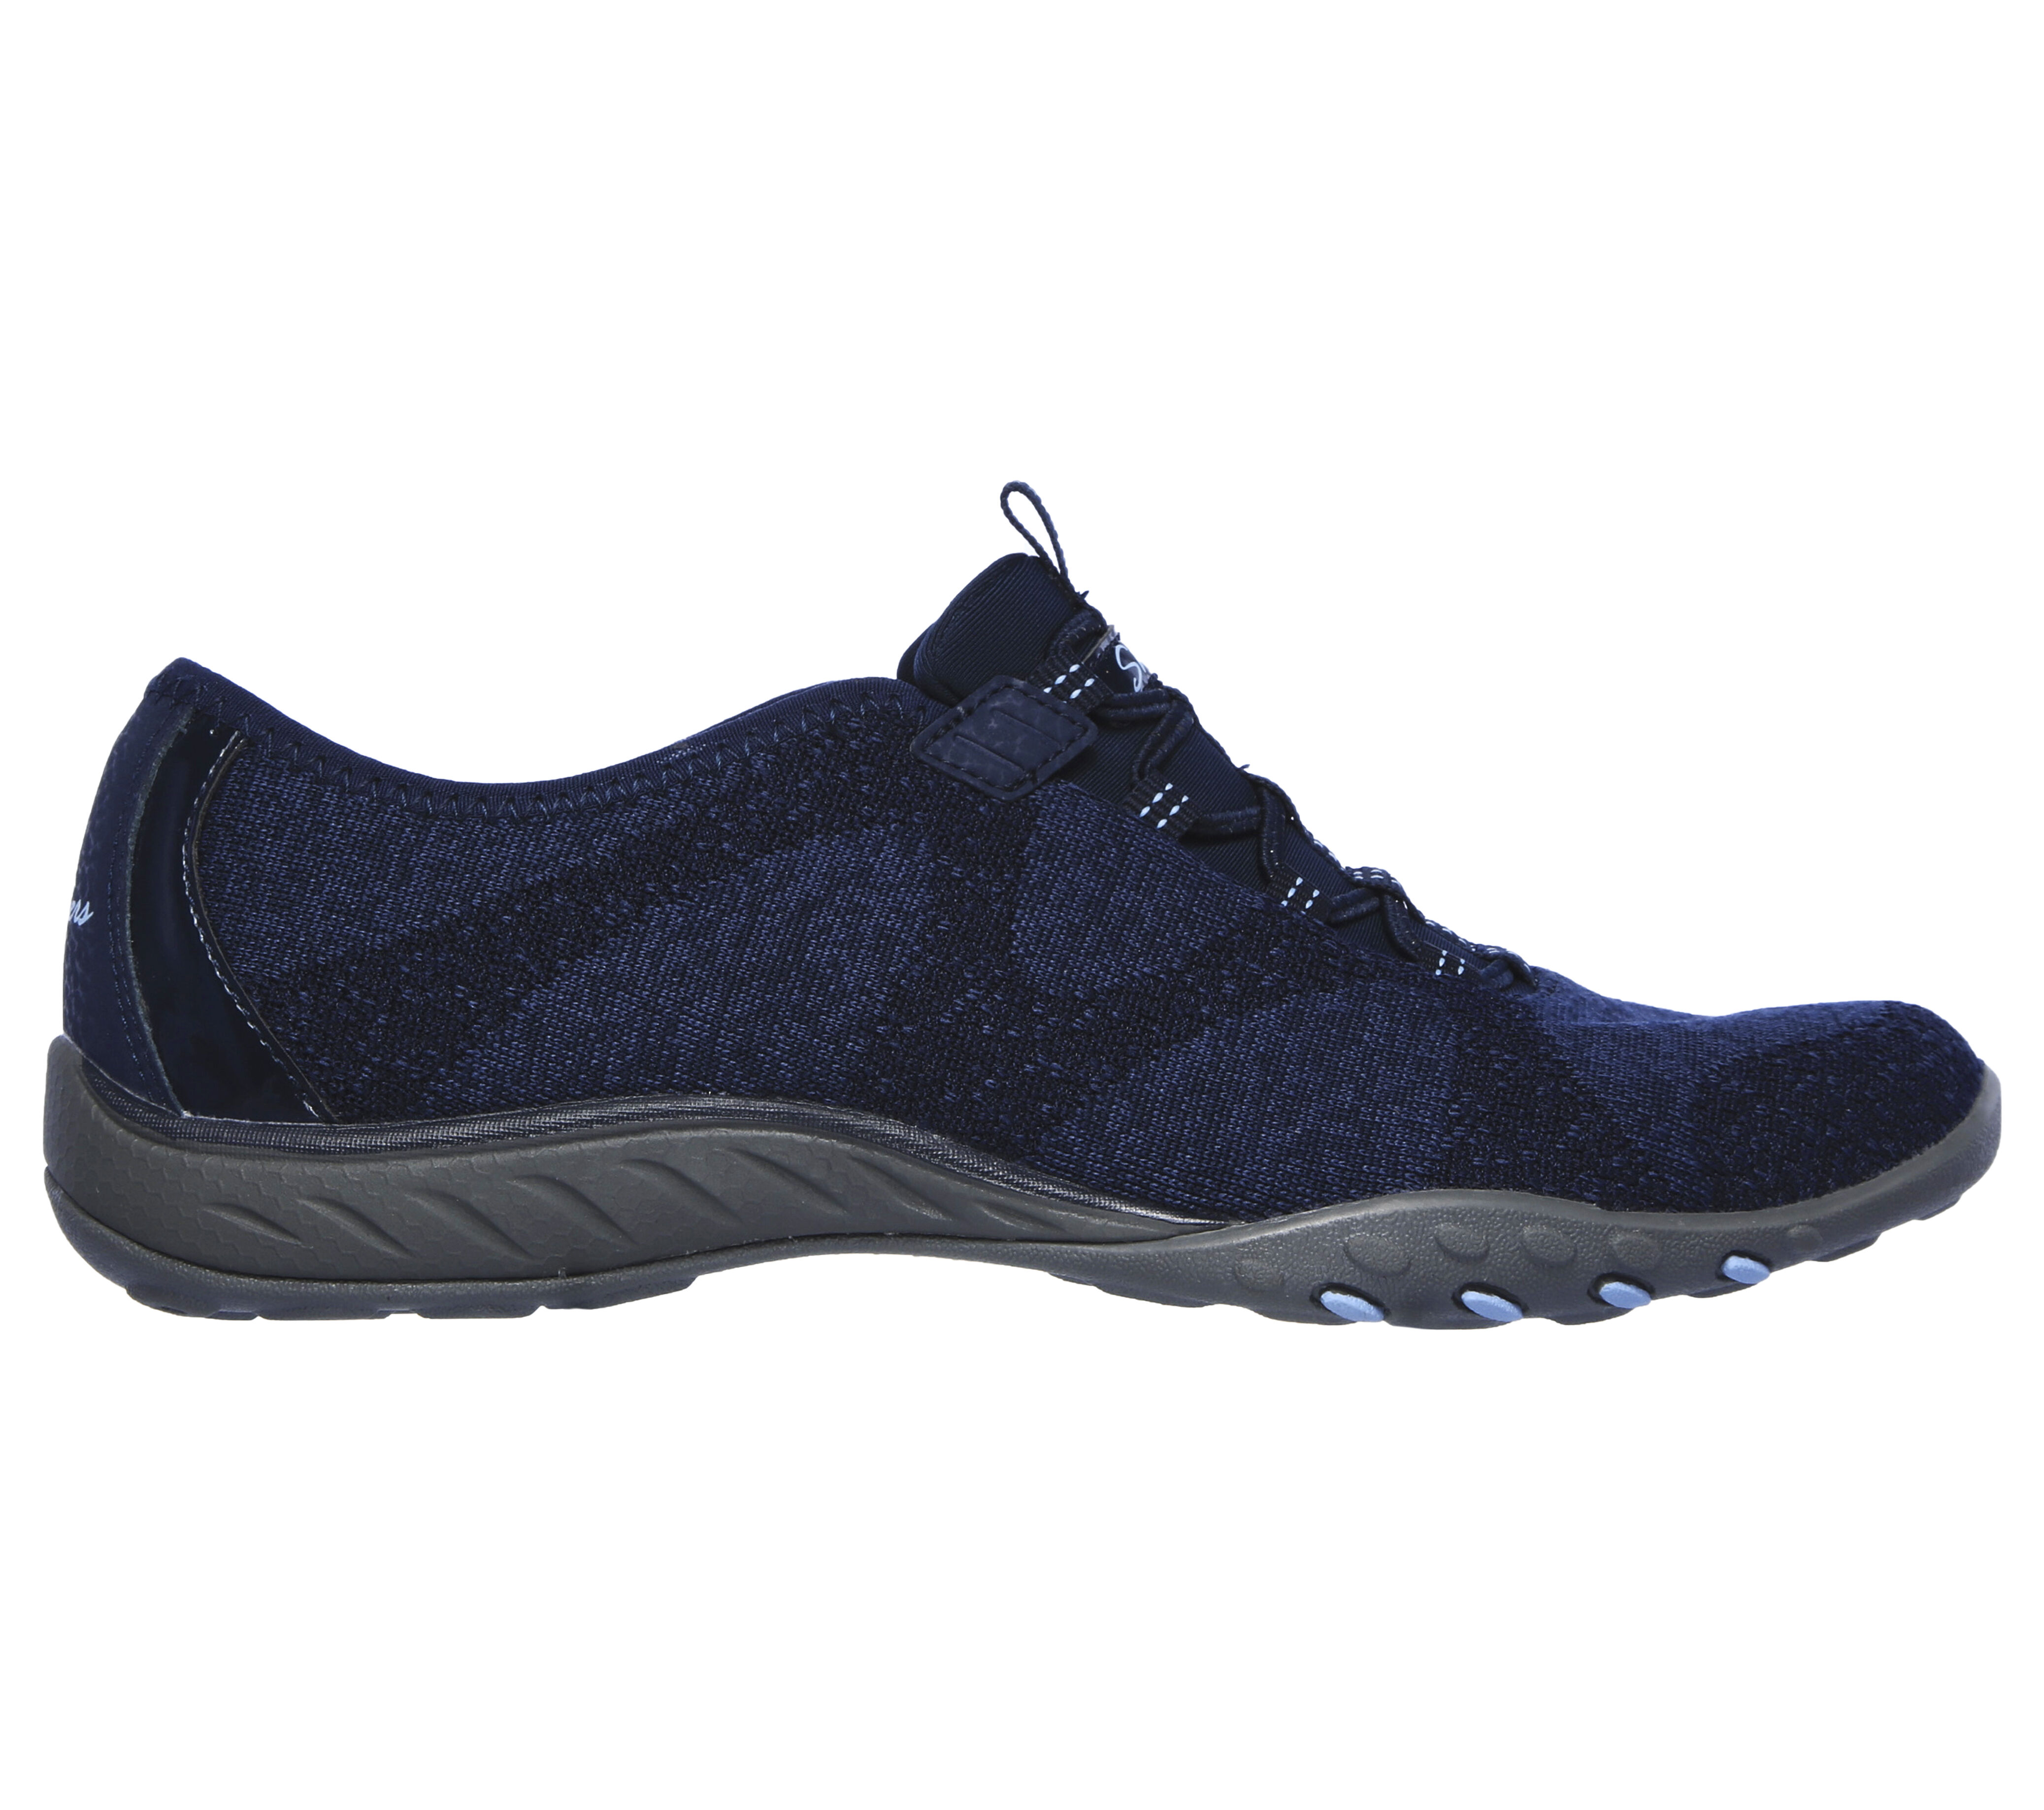 sketchers relaxed fit breathe easy